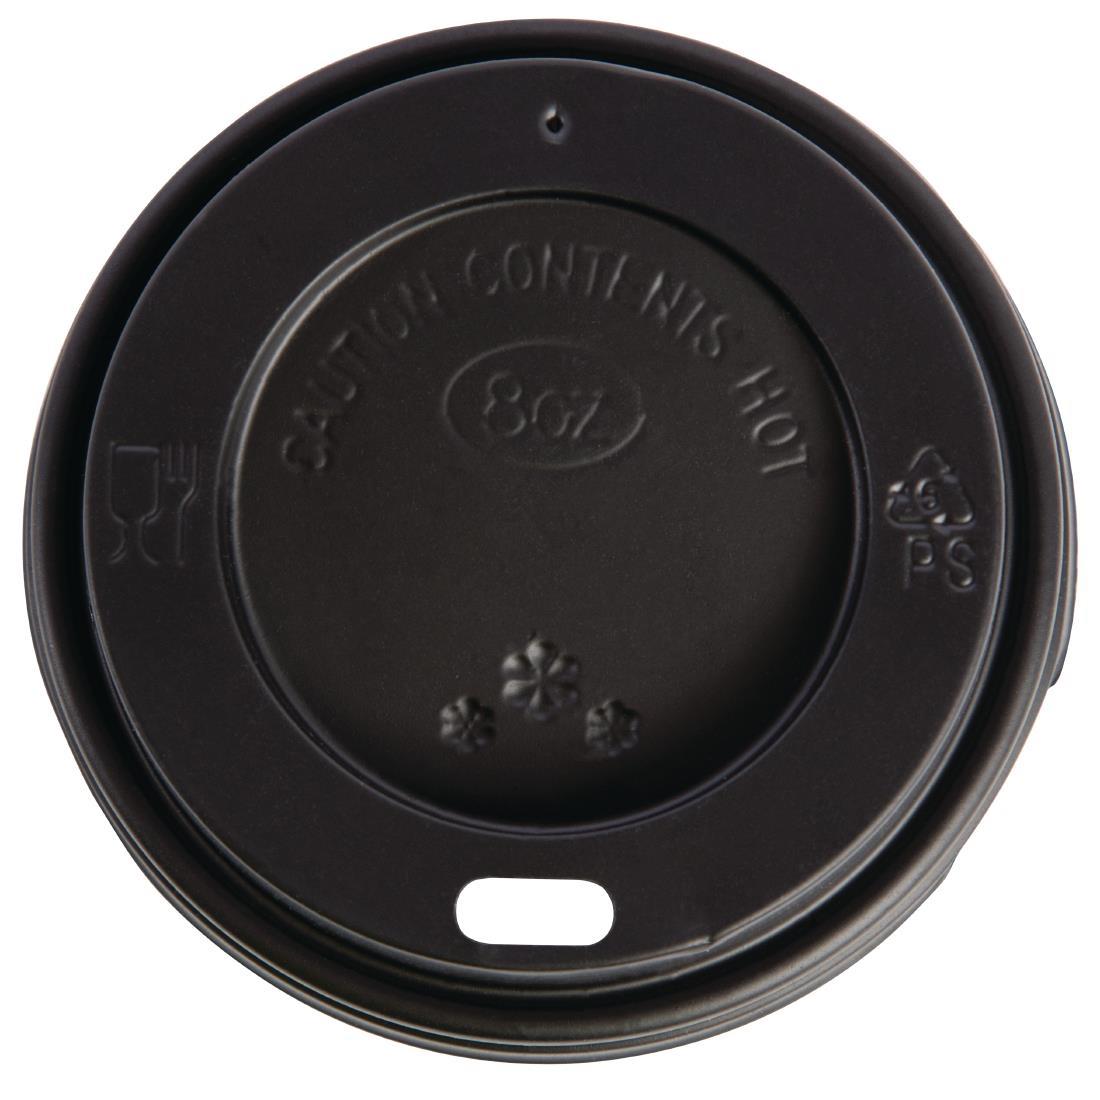 Fiesta Recyclable Coffee Cup Lids Black 225ml / 8oz (Pack of 50) - CW715  - 2